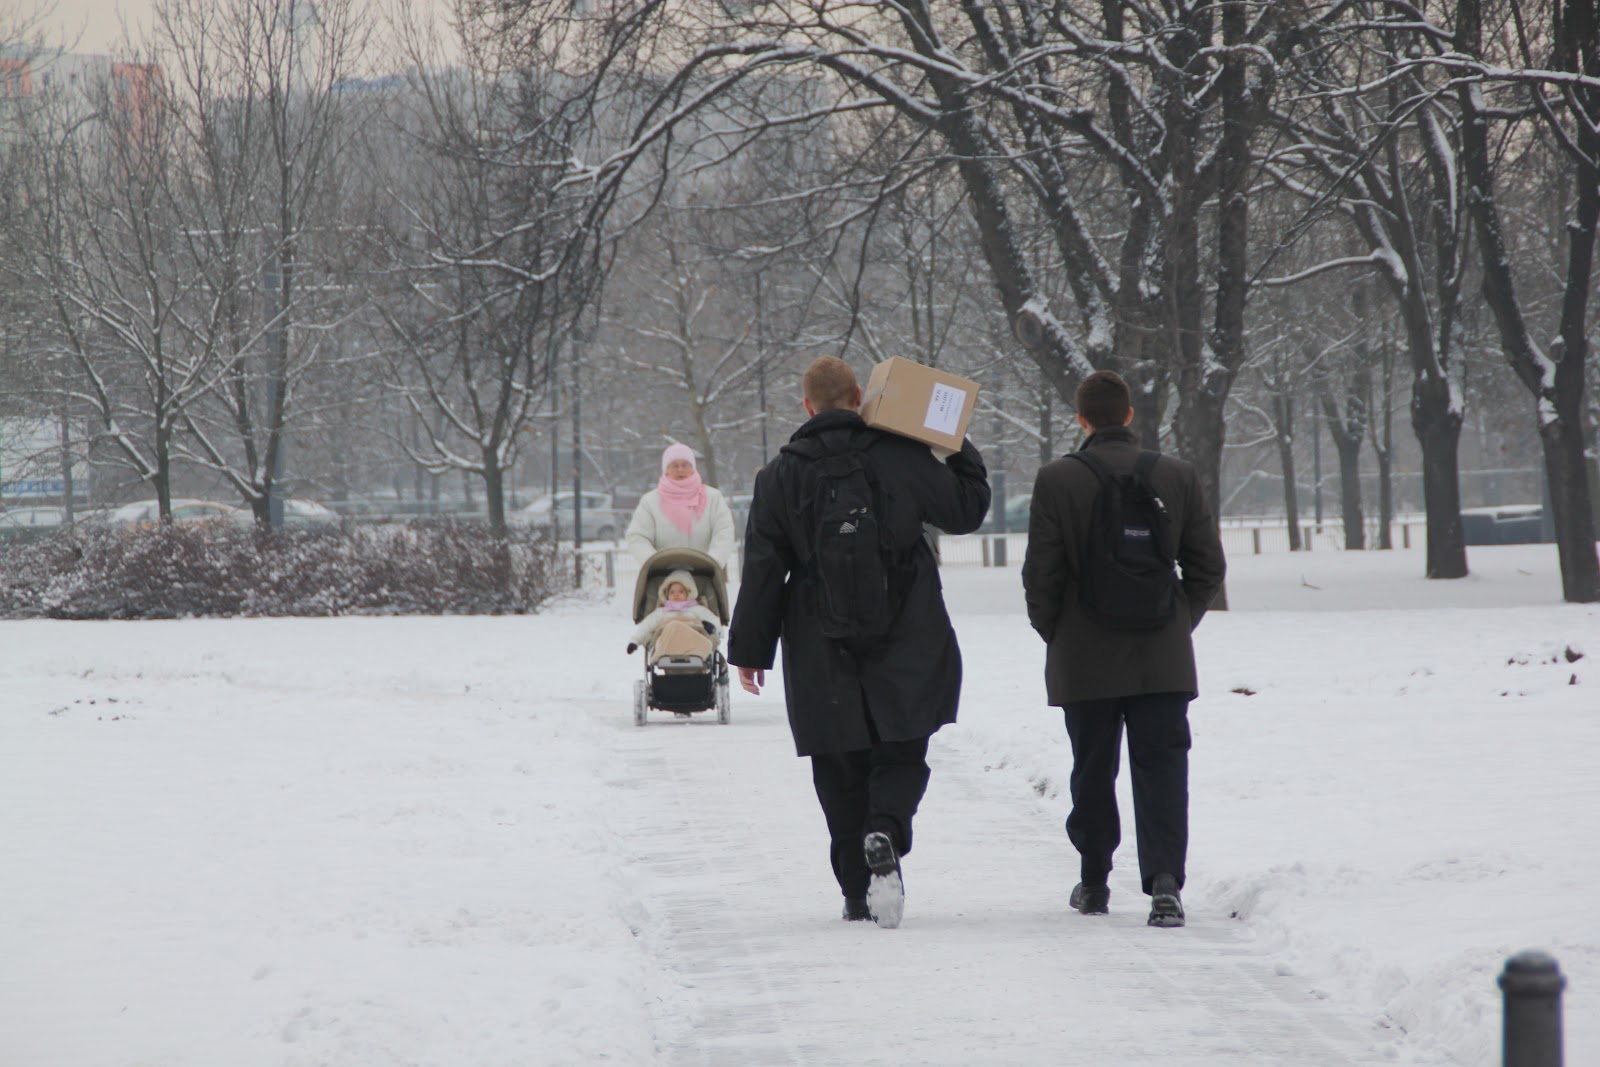 a LDS Missionaries in the snow Latter-day Saint23.JPG